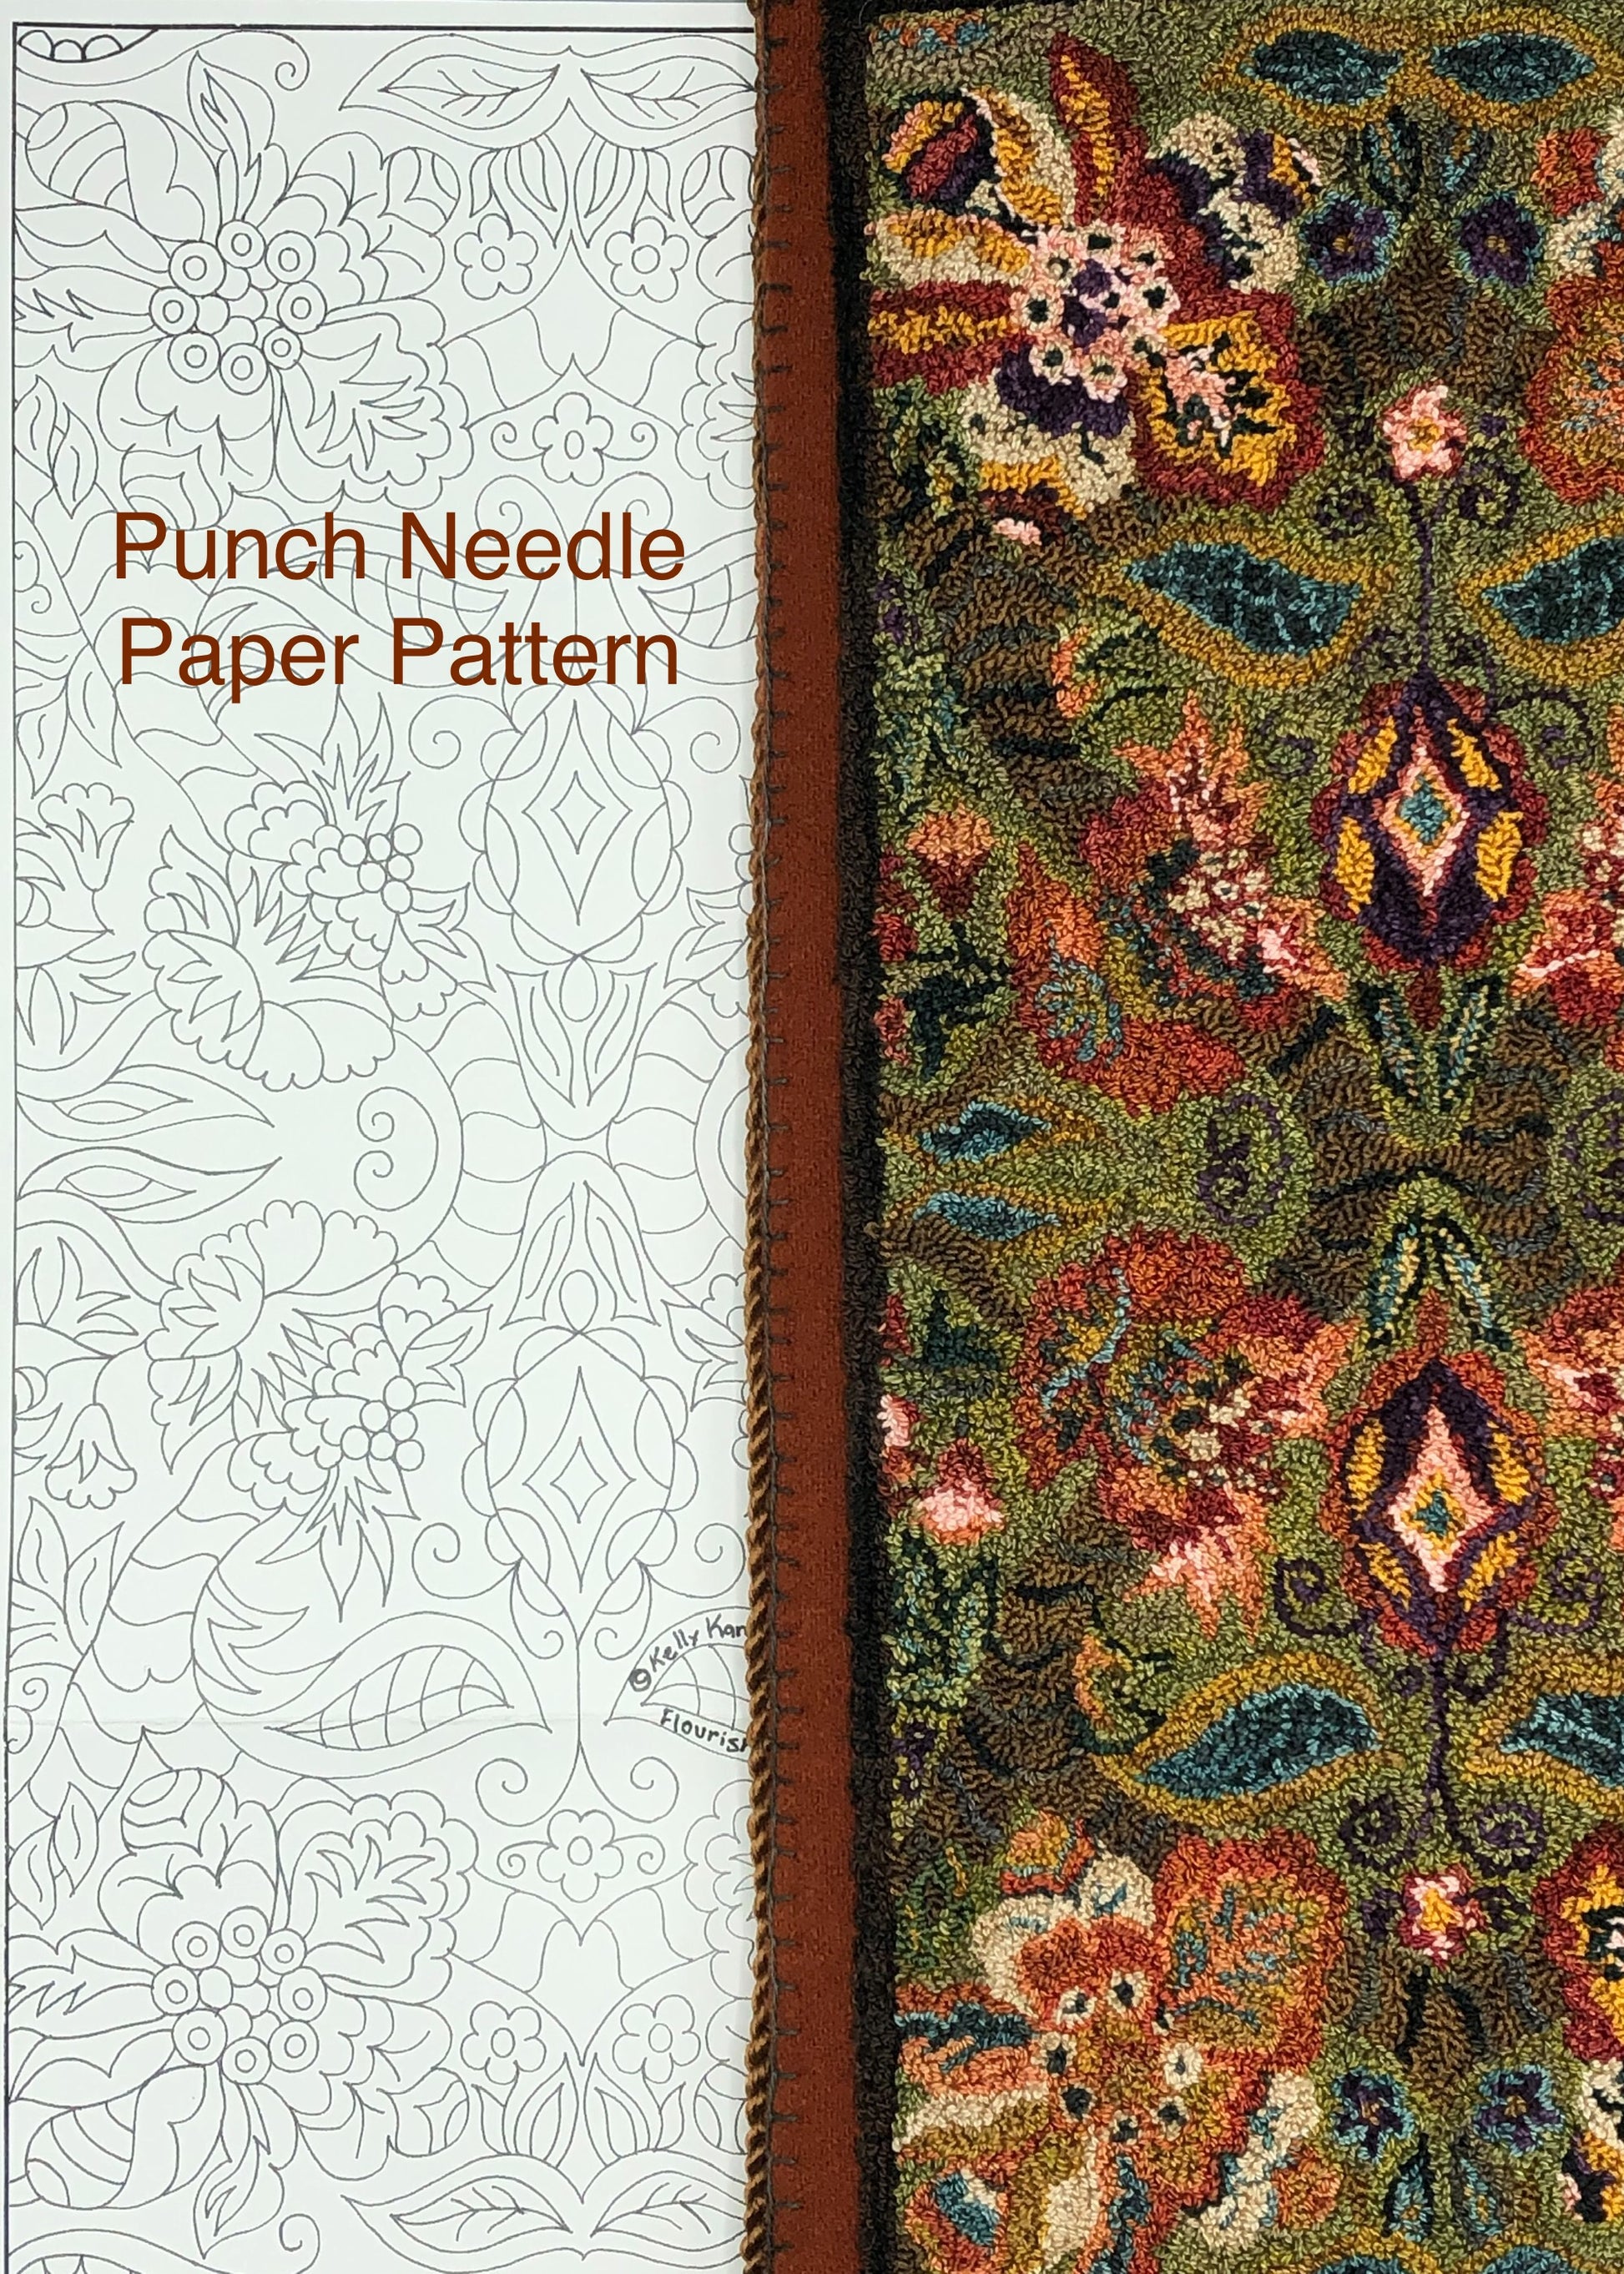 Flourish 3060-Punch Needle Pattern, Paper and Cloth patterns available. Floral design, by Orphaned Wool